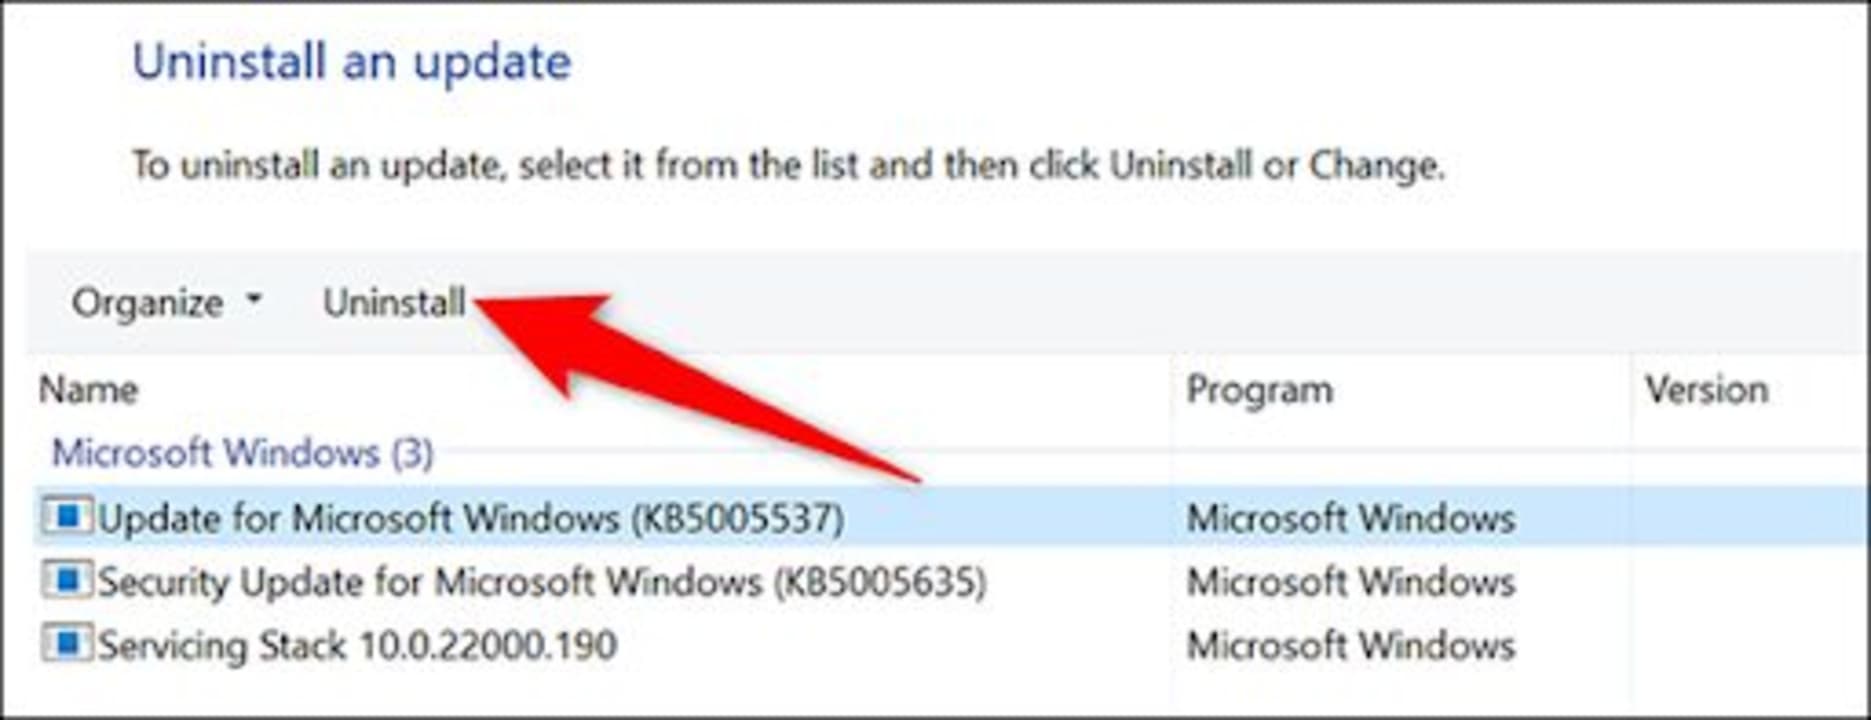 How to uninstall updates in Windows 10 and Windows 11